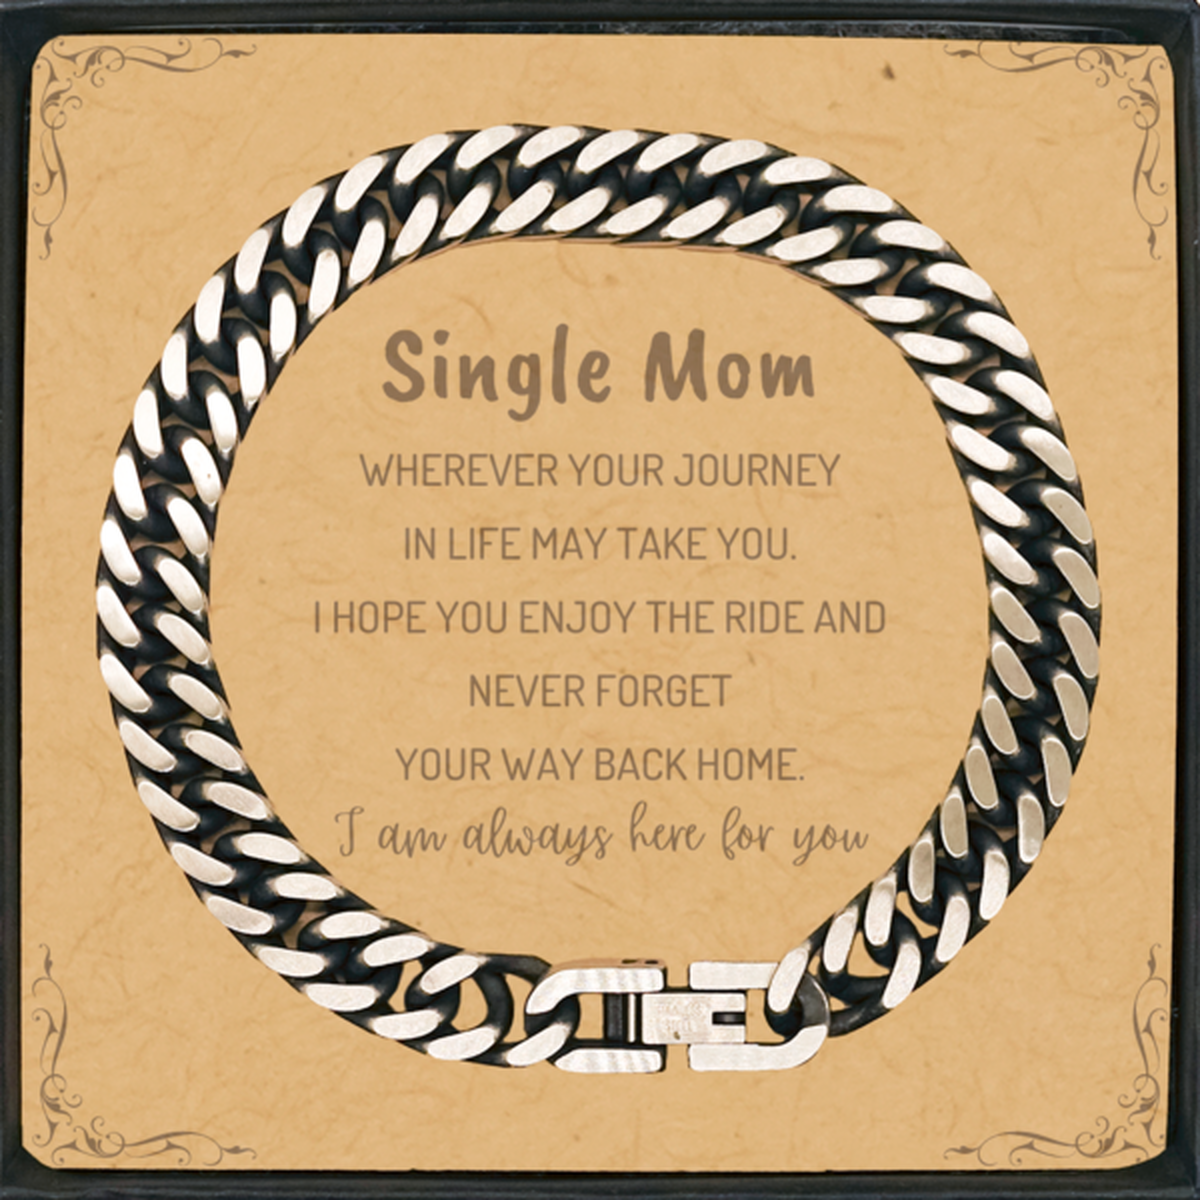 Single Mom wherever your journey in life may take you, I am always here for you Single Mom Cuban Link Chain Bracelet, Awesome Christmas Gifts For Single Mom Message Card, Single Mom Birthday Gifts for Men Women Family Loved One